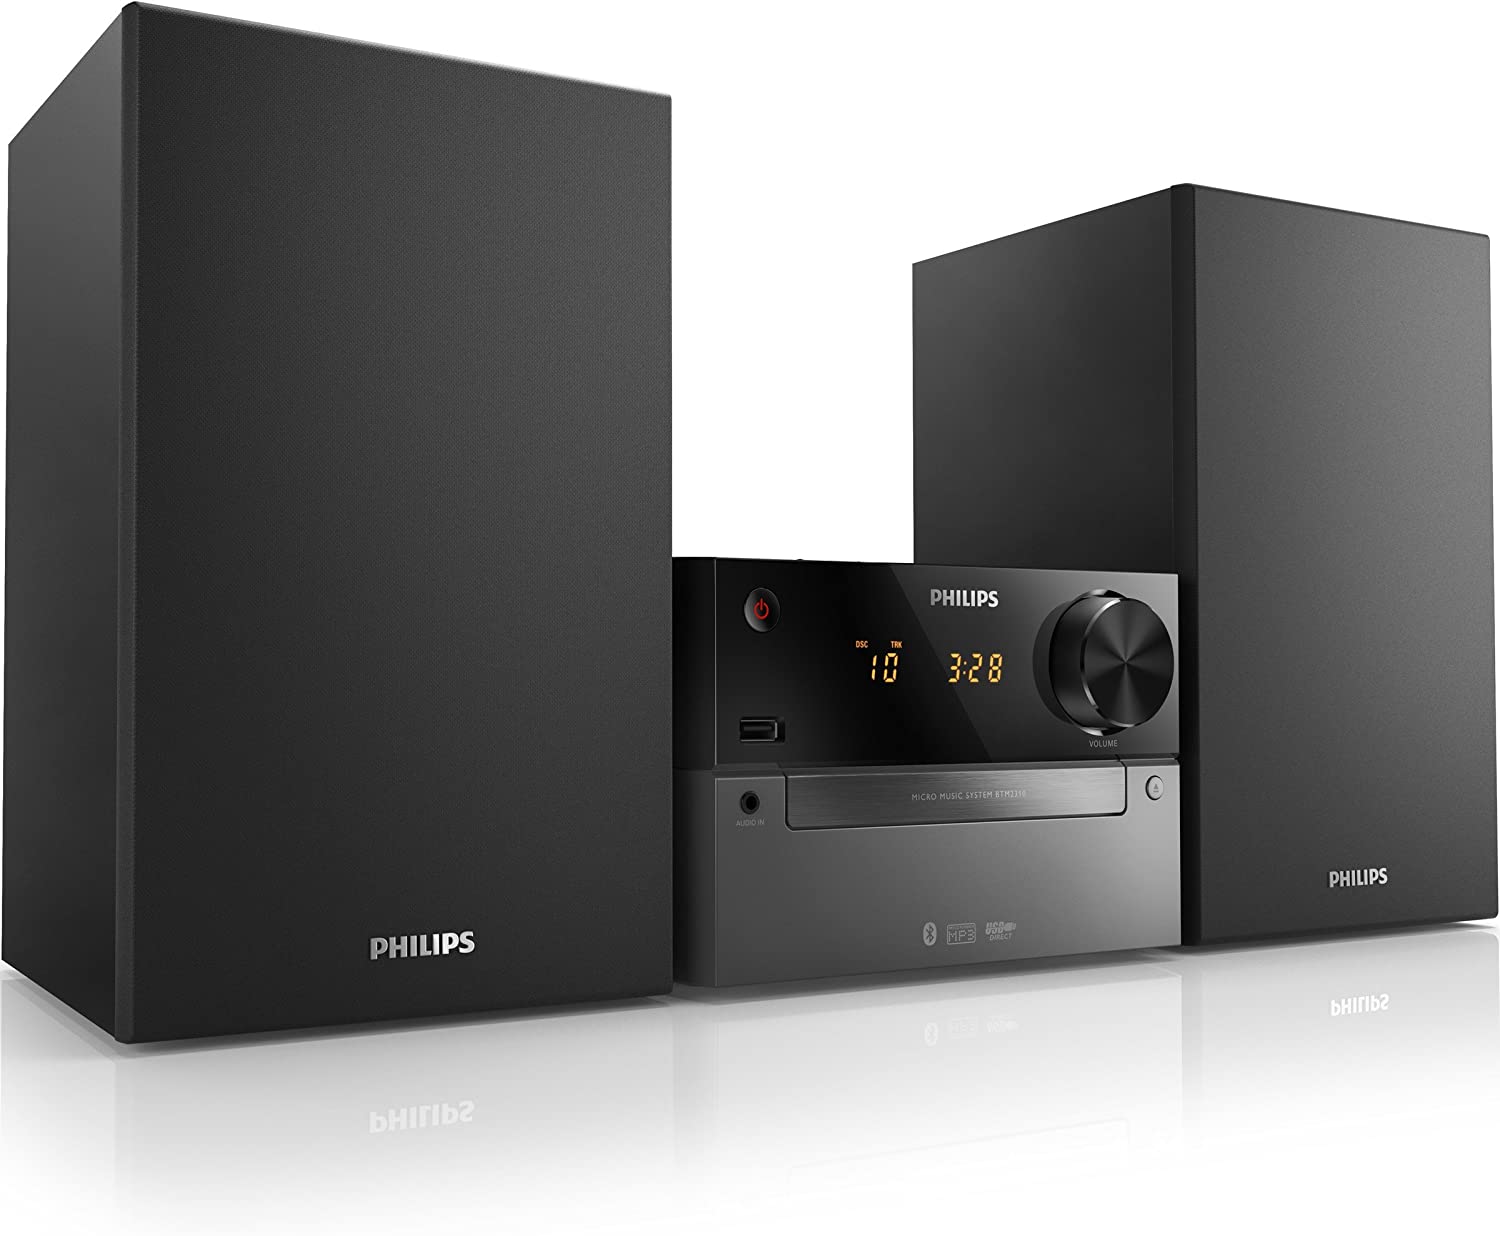 Philips BTM2310 Mini Stereo System with Bluetooth Wireless CD Player (CD, MP3, USB for Charging, Ukw, 15 Watt) - Black - image 1 of 7